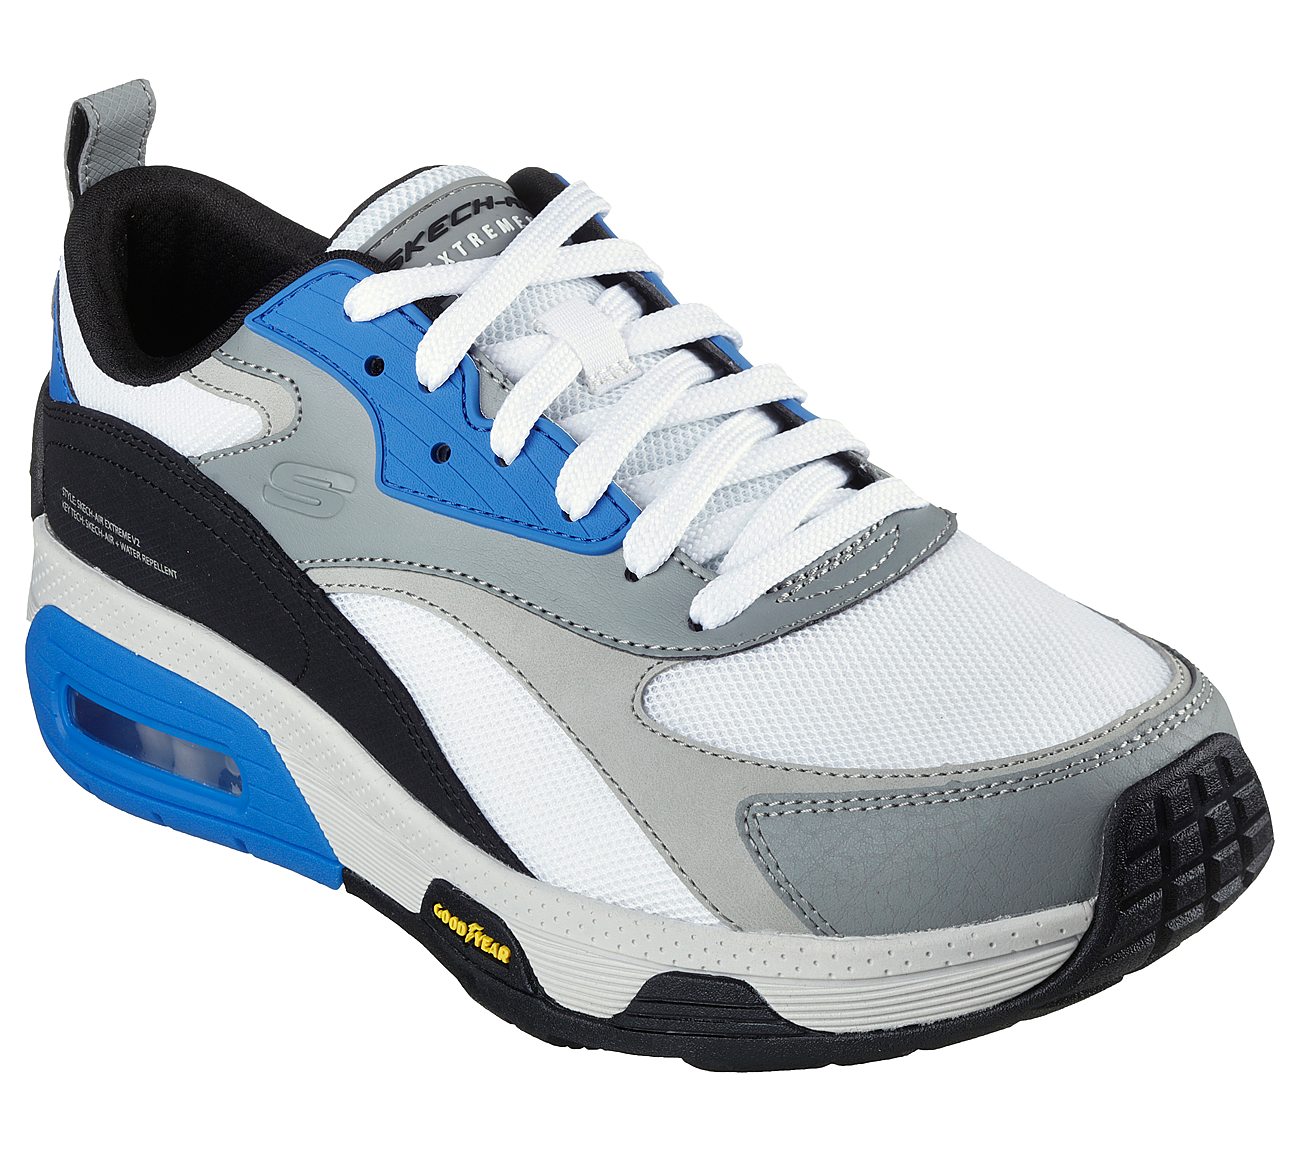 SKECH-AIR EXTREME V2, WHITE/BLACK/BLUE Footwear Right View